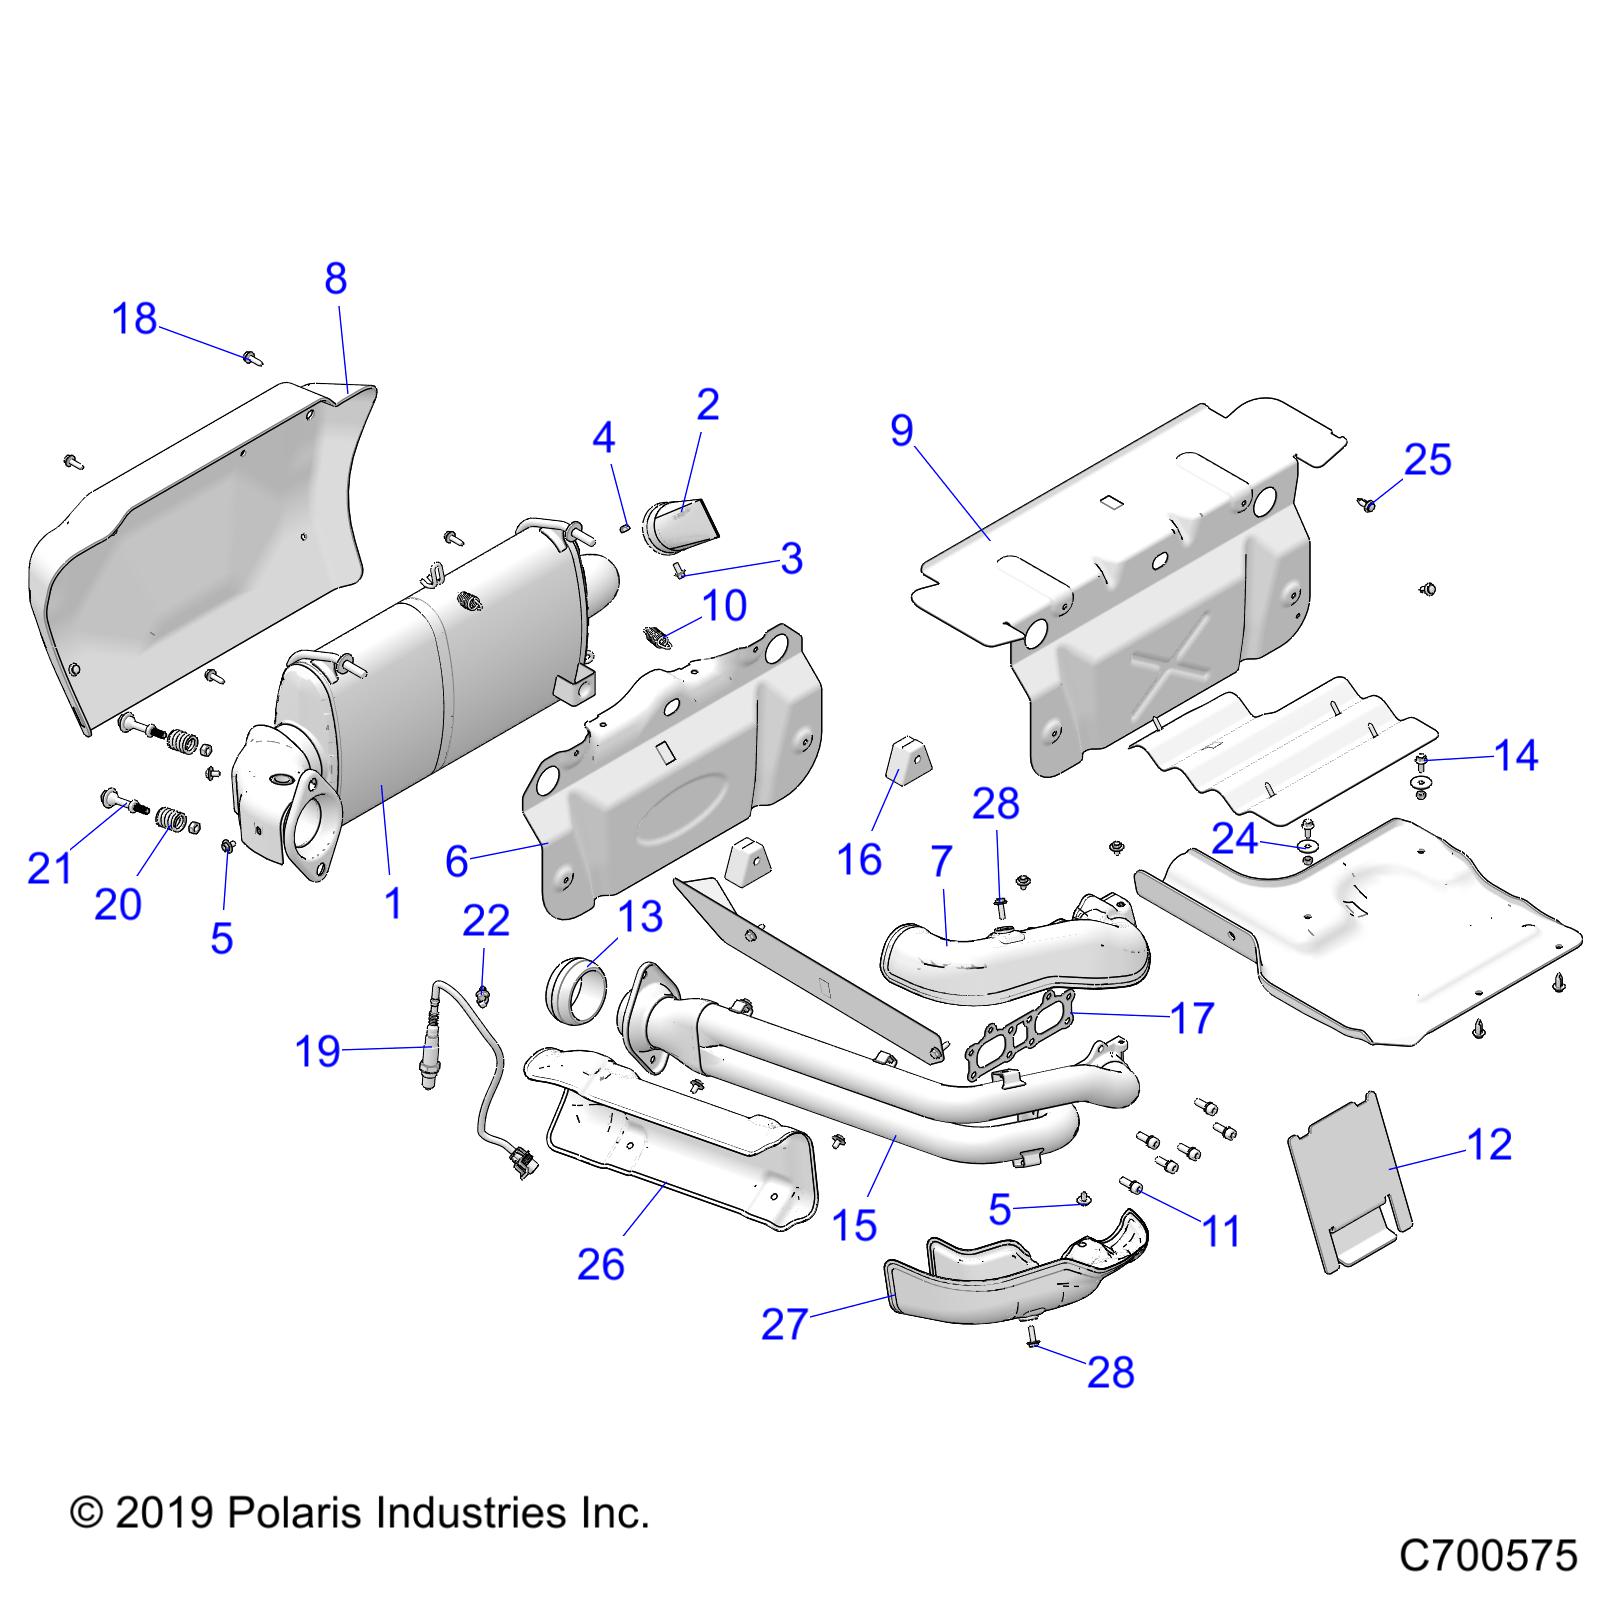 Part Number : 1263285 HEADPIPE ASSEMBLY